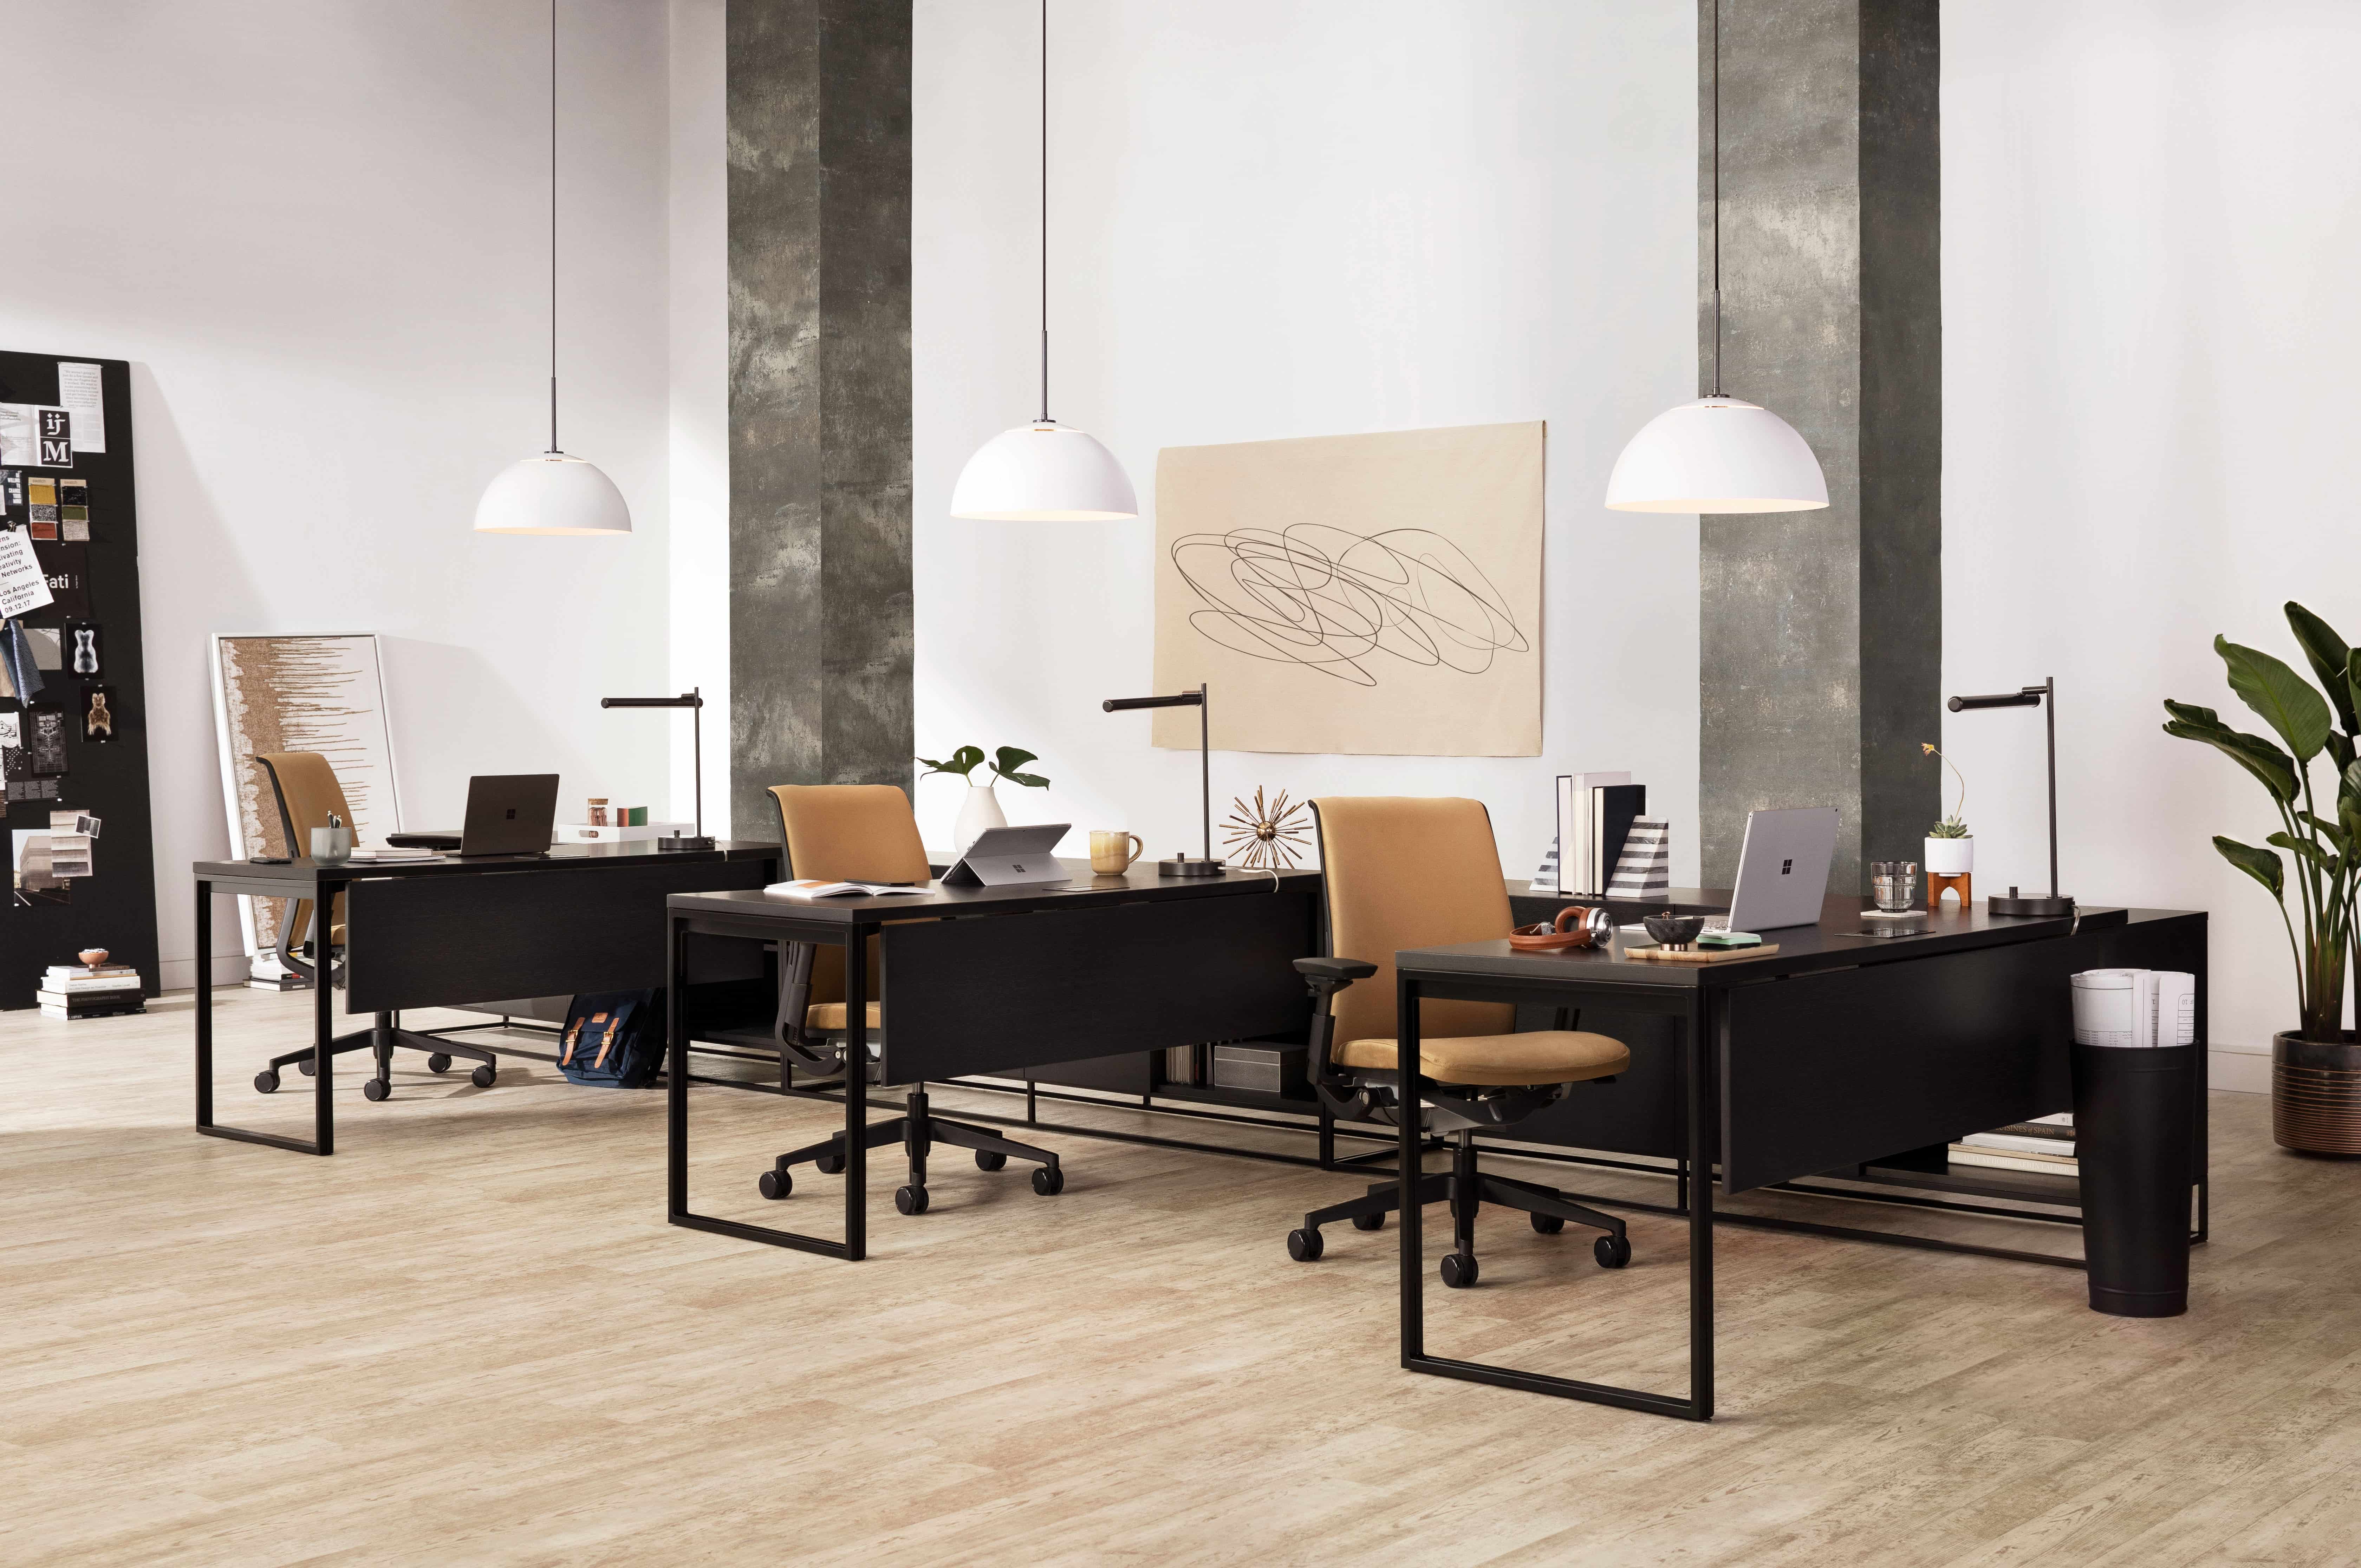 Modern office with black desks, tan swivel chairs, hanging white lights, and artwork on walls.